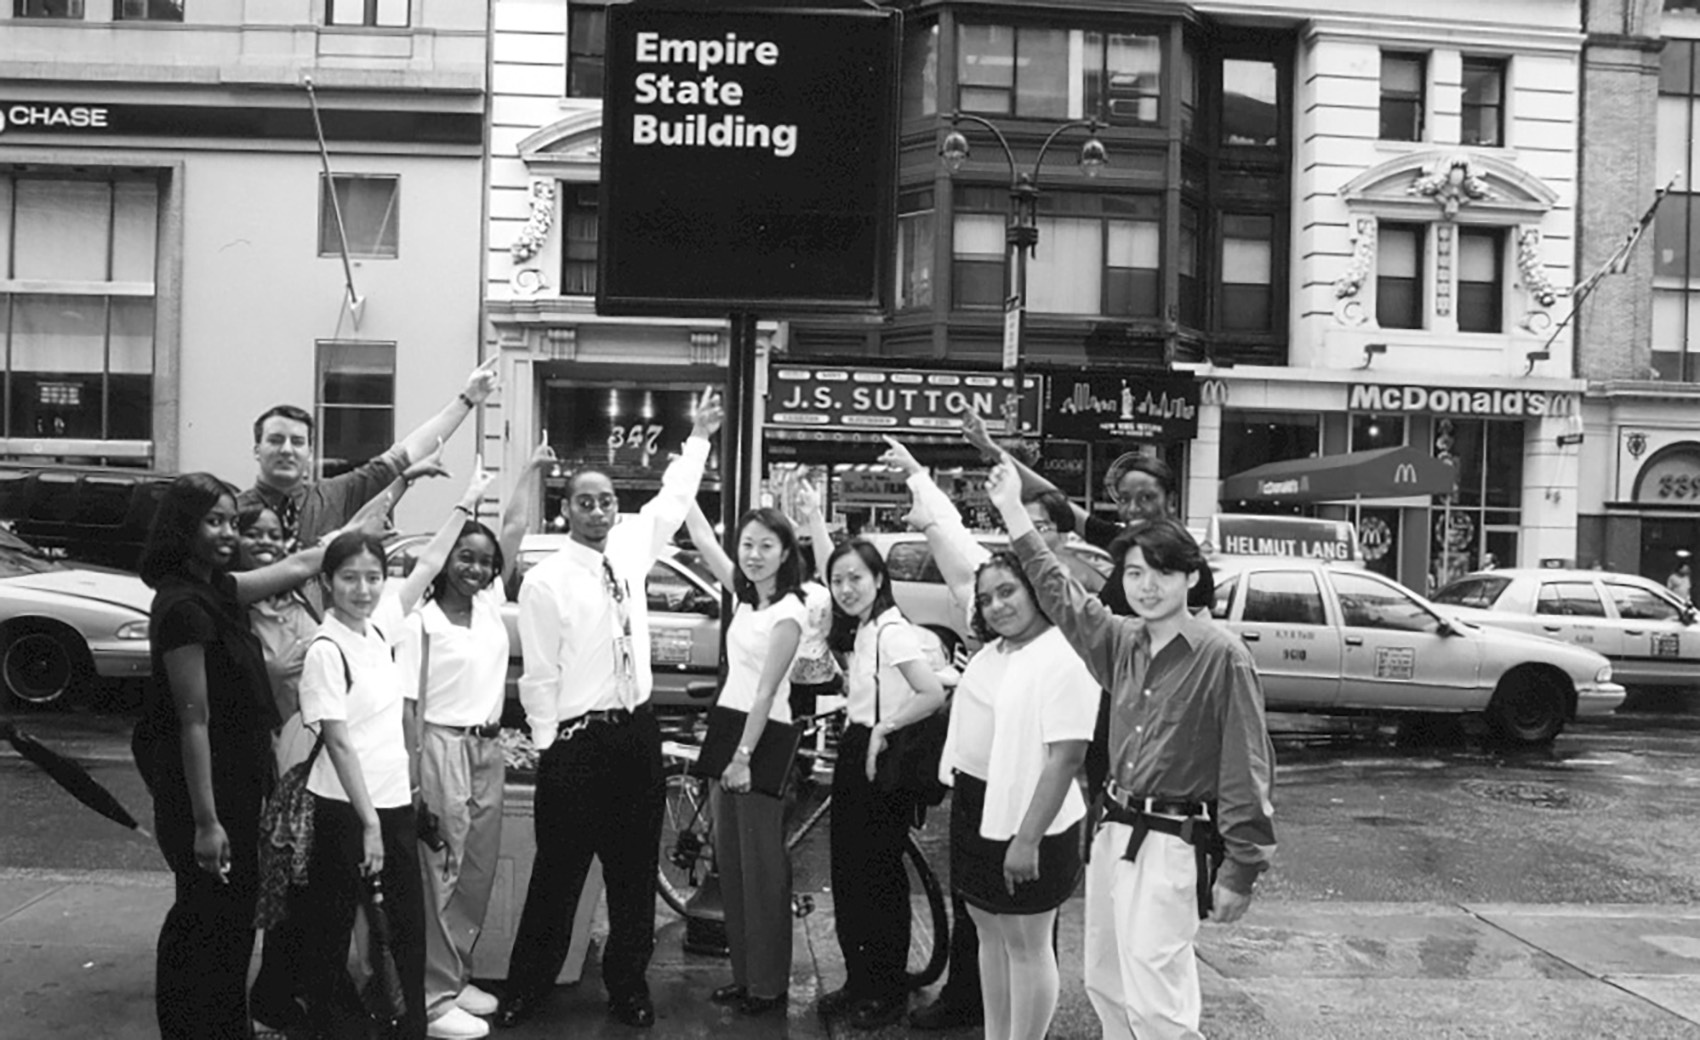 King's Students with Empire State Building Sign